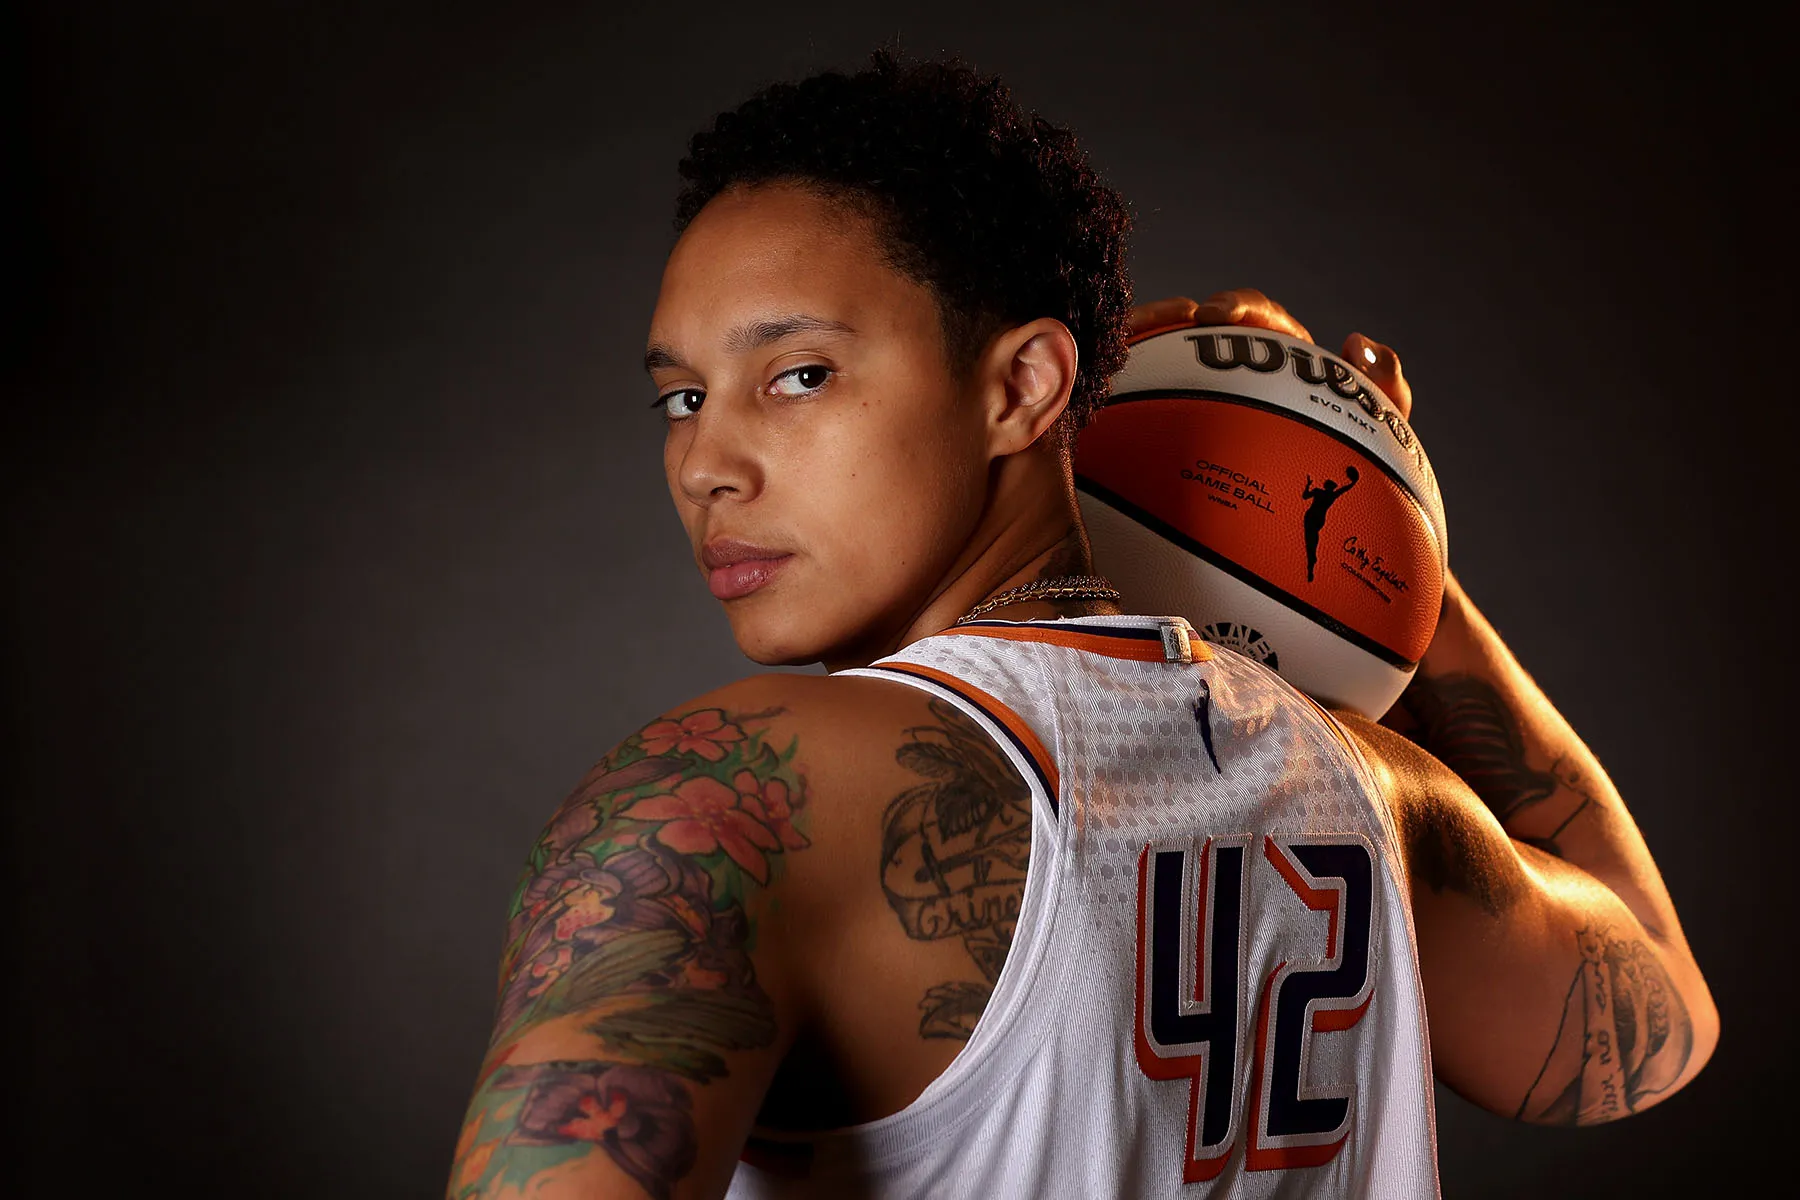 WNBA stars continue to lead charge for social justice and equality